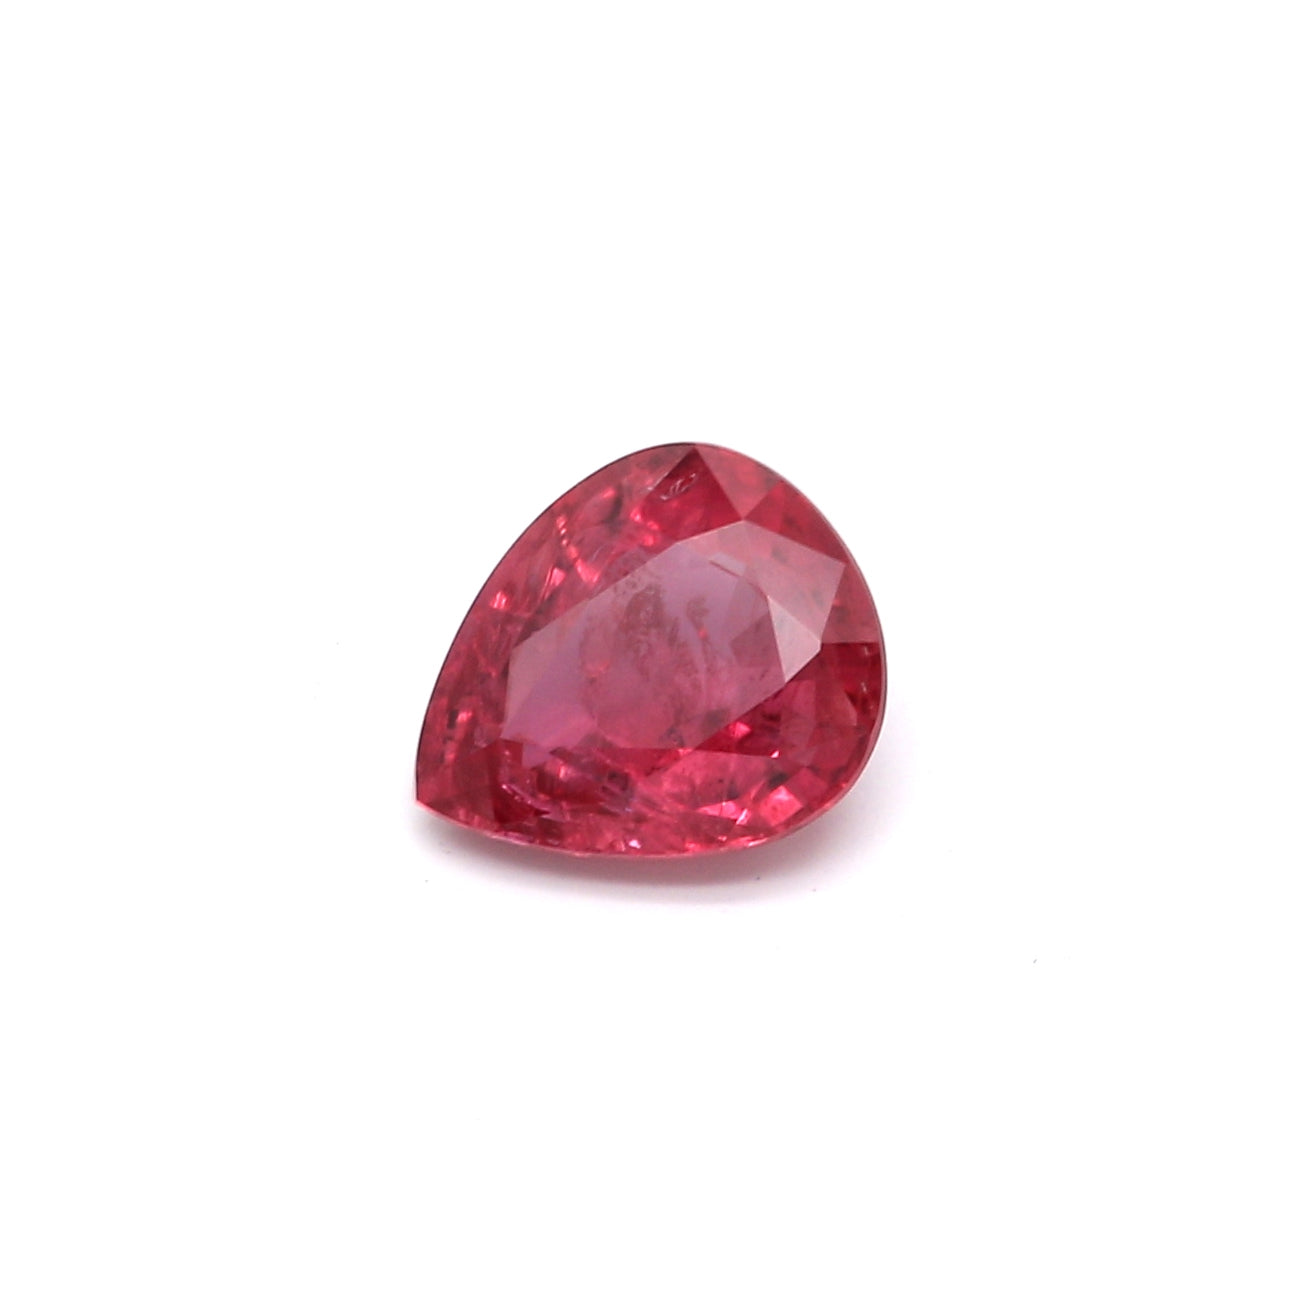 0.62ct Pinkish Red, Pear Shape Ruby, Heated, Thailand - 5.82 x 4.90 x 2.68mm